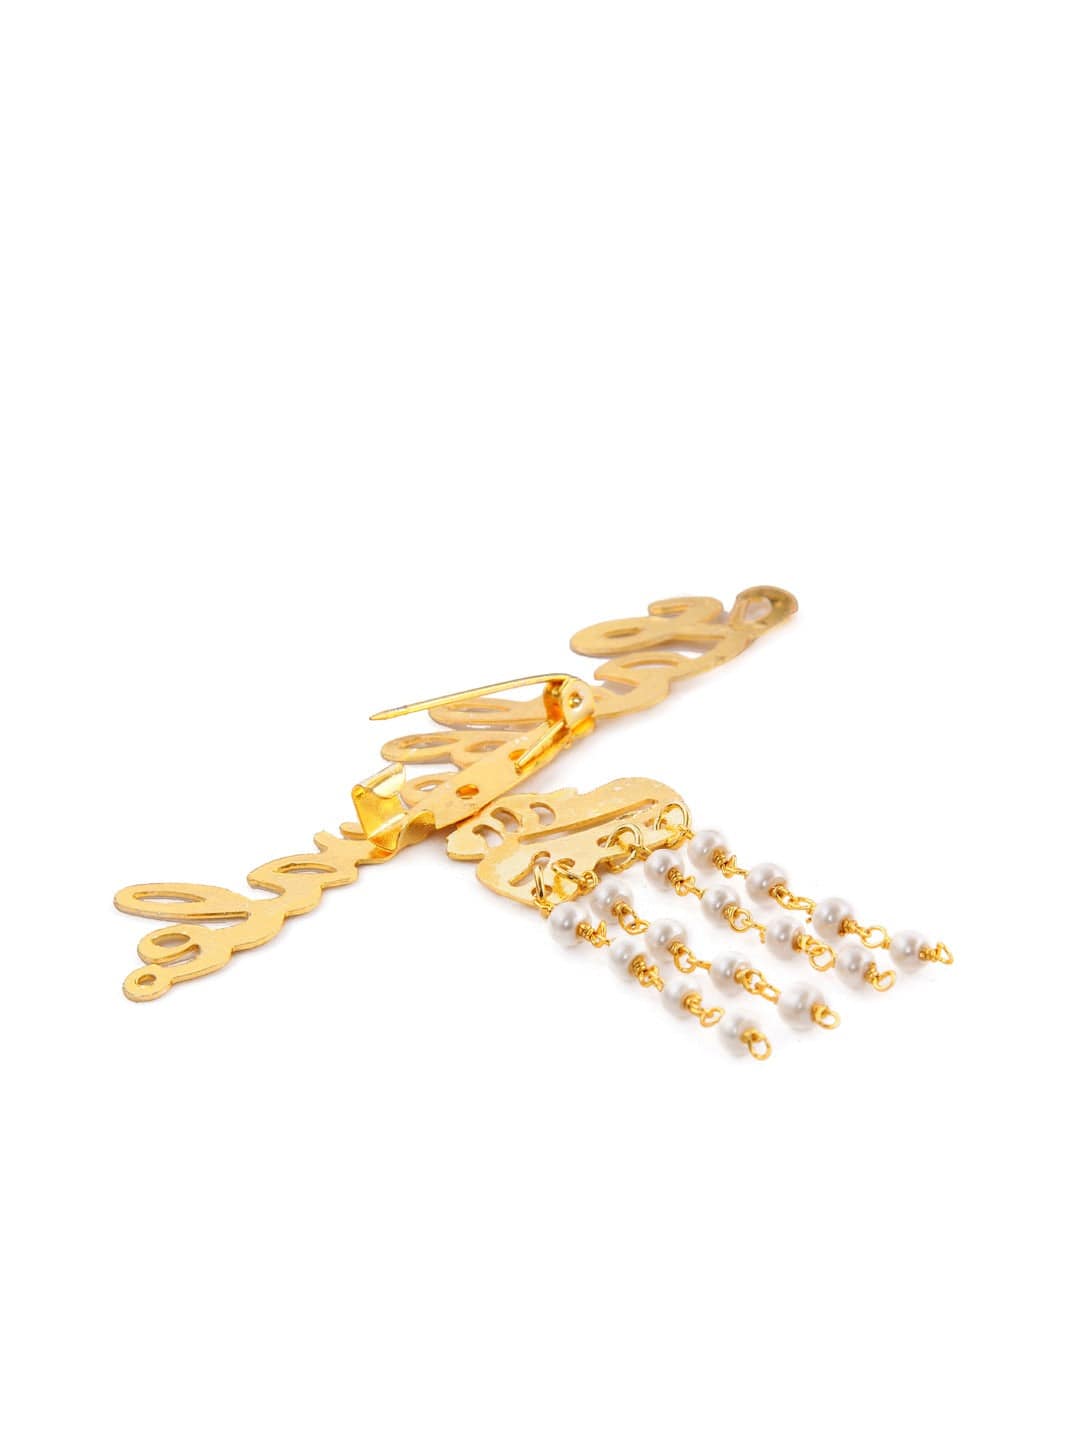 Rubans Set Of 2 Gold-Toned White Pearls Brooch Brooch